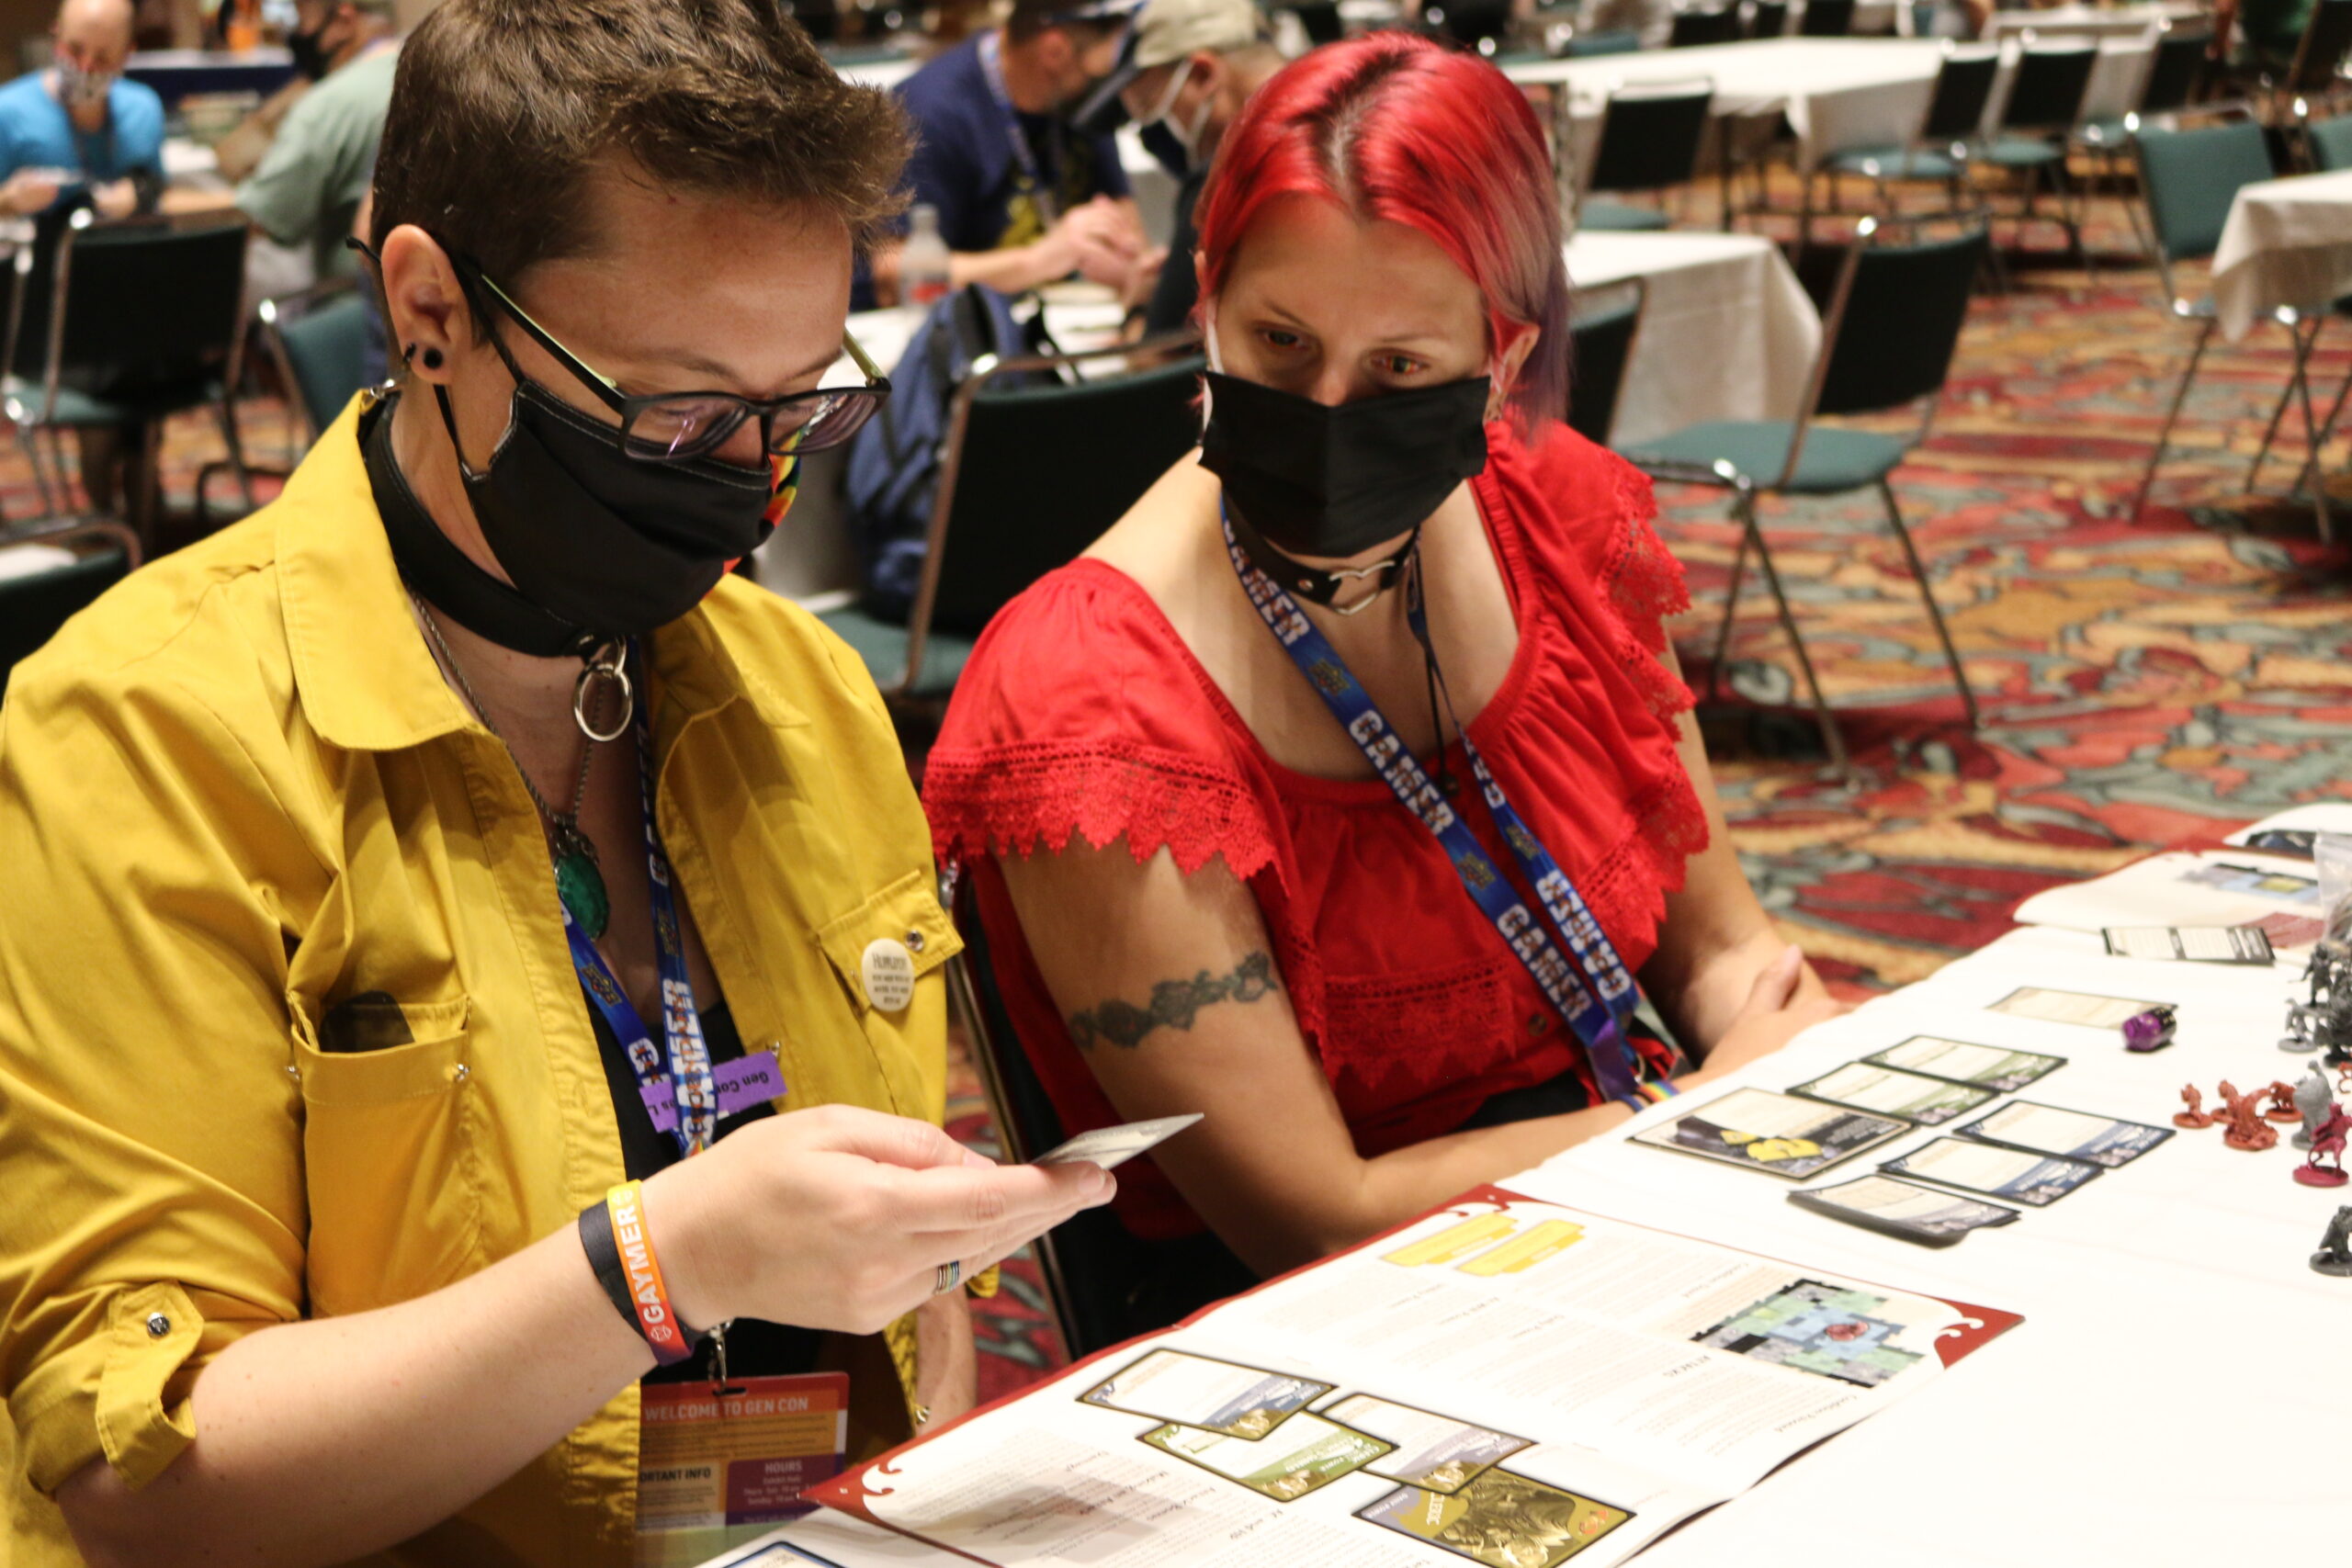 Gen Con attendees sit and play a tabletop card game